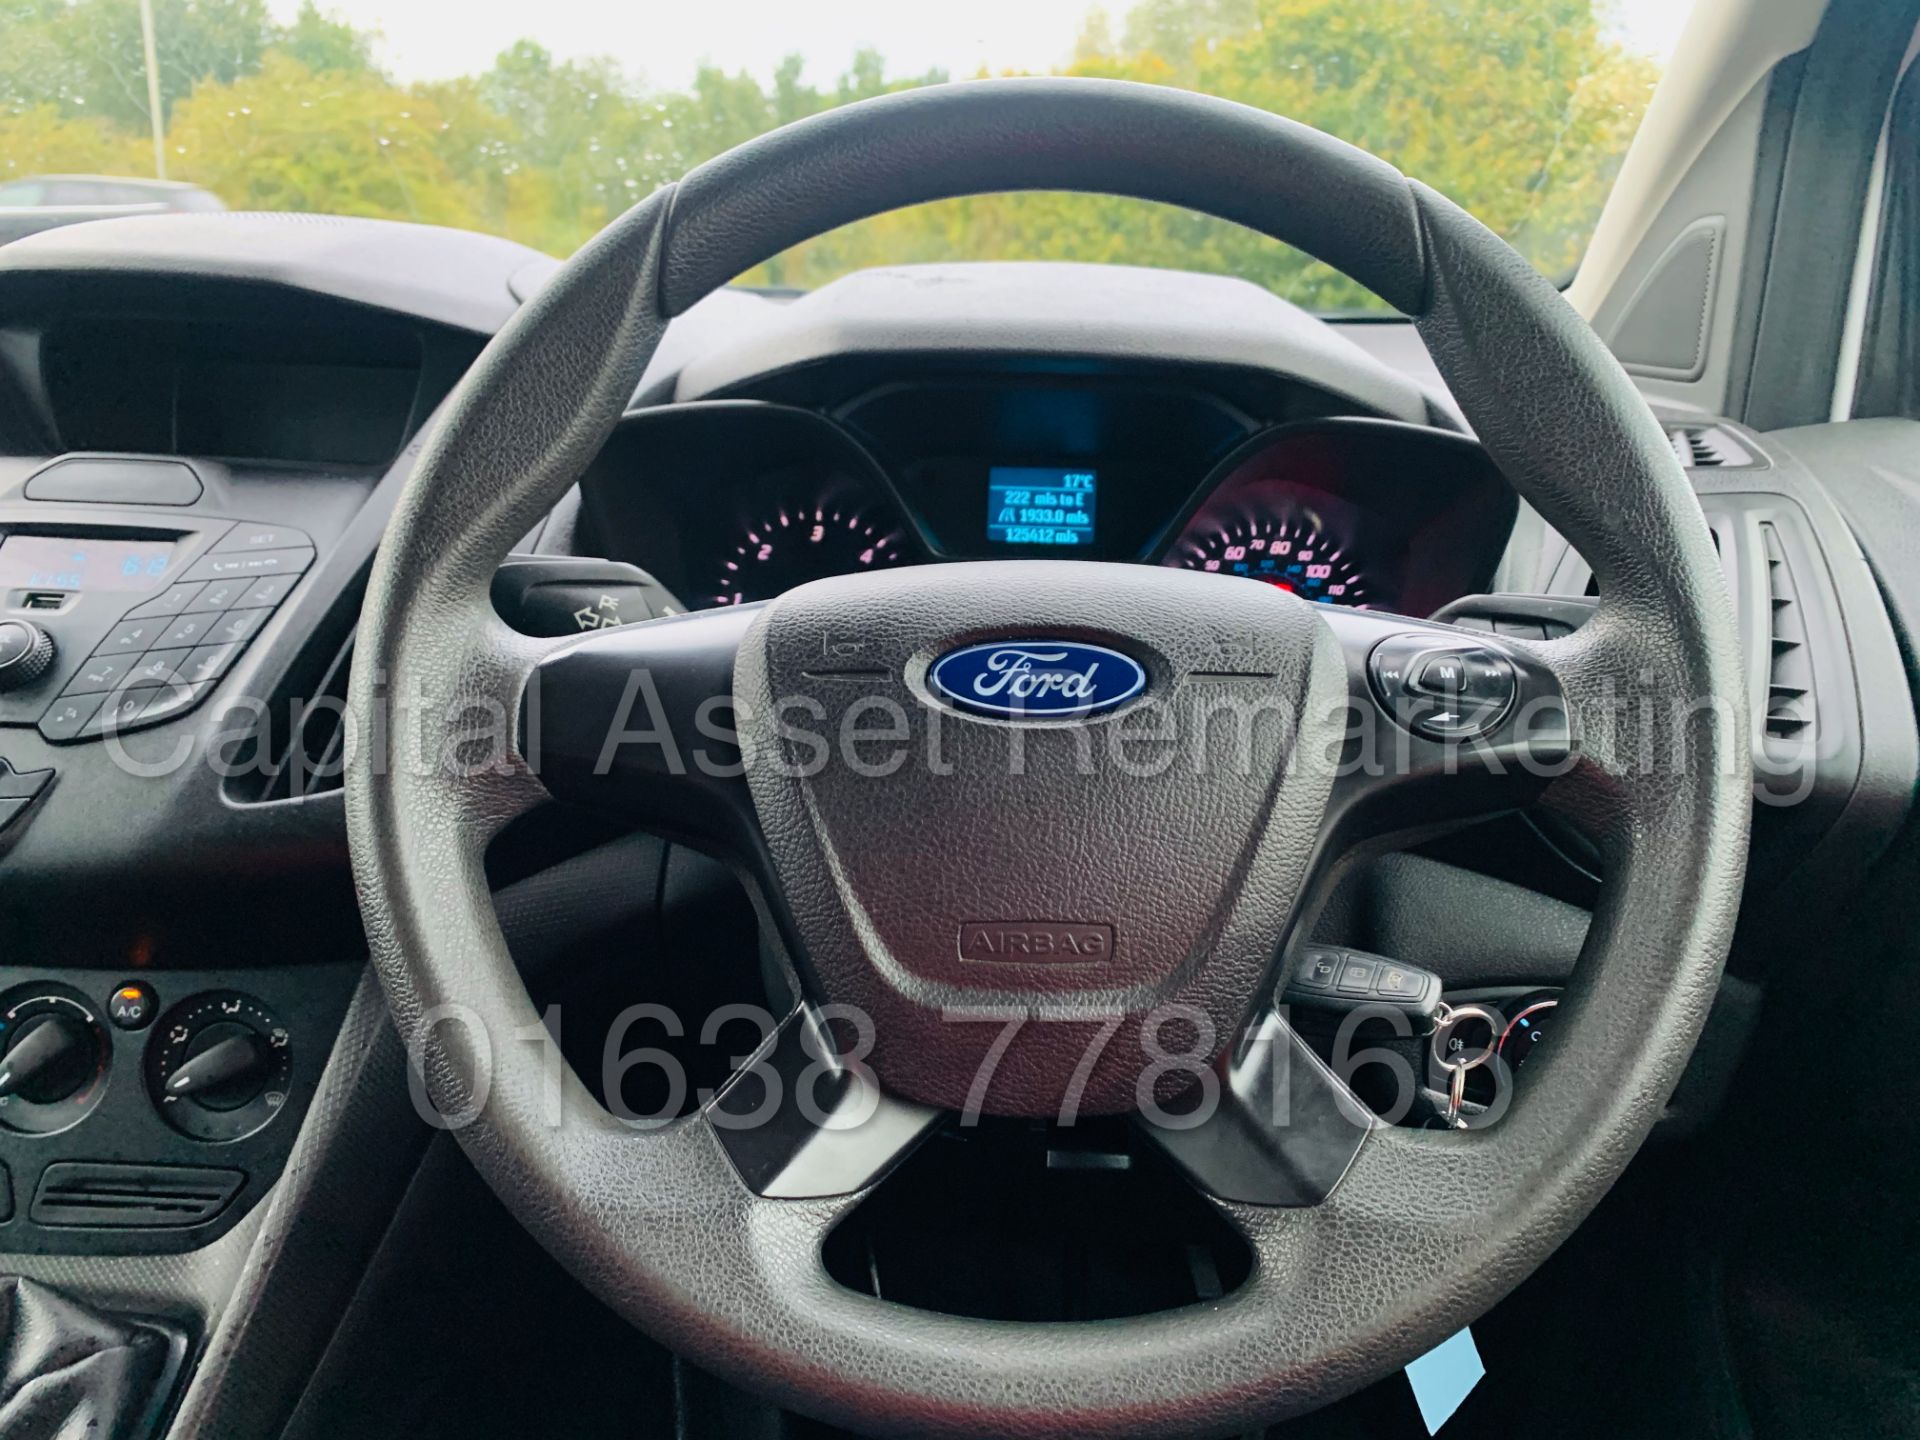 ON SALE FORD TRANSIT CONNECT *LWB- 5 SEATER CREW VAN* (2018 - EURO 6) 1.5 TDCI *AIR CON* (1 OWNER) - Image 44 of 45